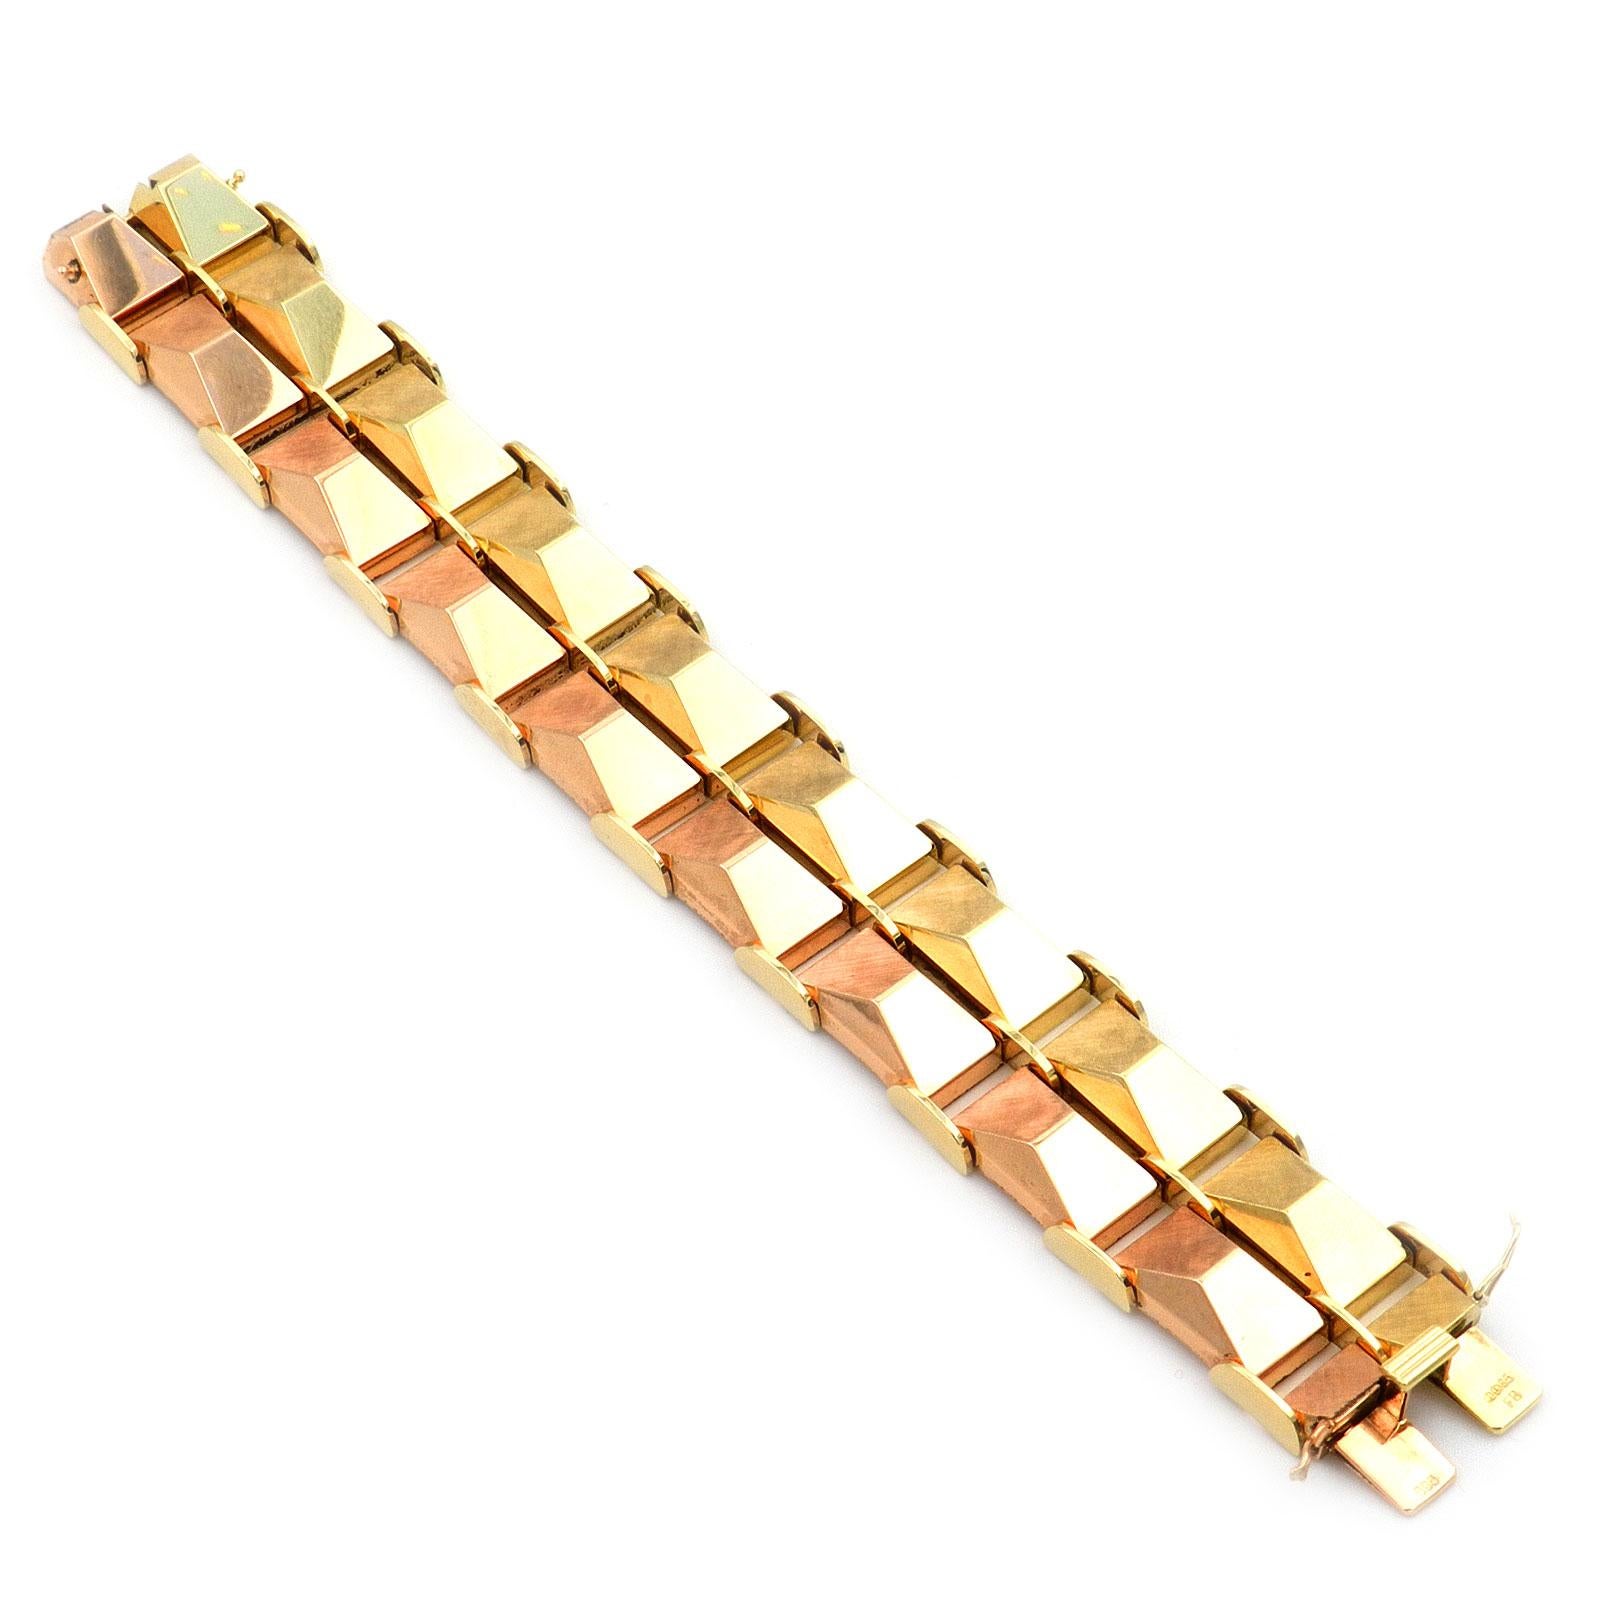 Retro 14K Two Tone Gold Bracelet, Germany circa 1950

Wide, heavy gold bracelet, made of two-tone gold in a brick pattern, partially fine satin finish. The rhombus-shaped links are polished on one side, satined on the other and arranged in two rows